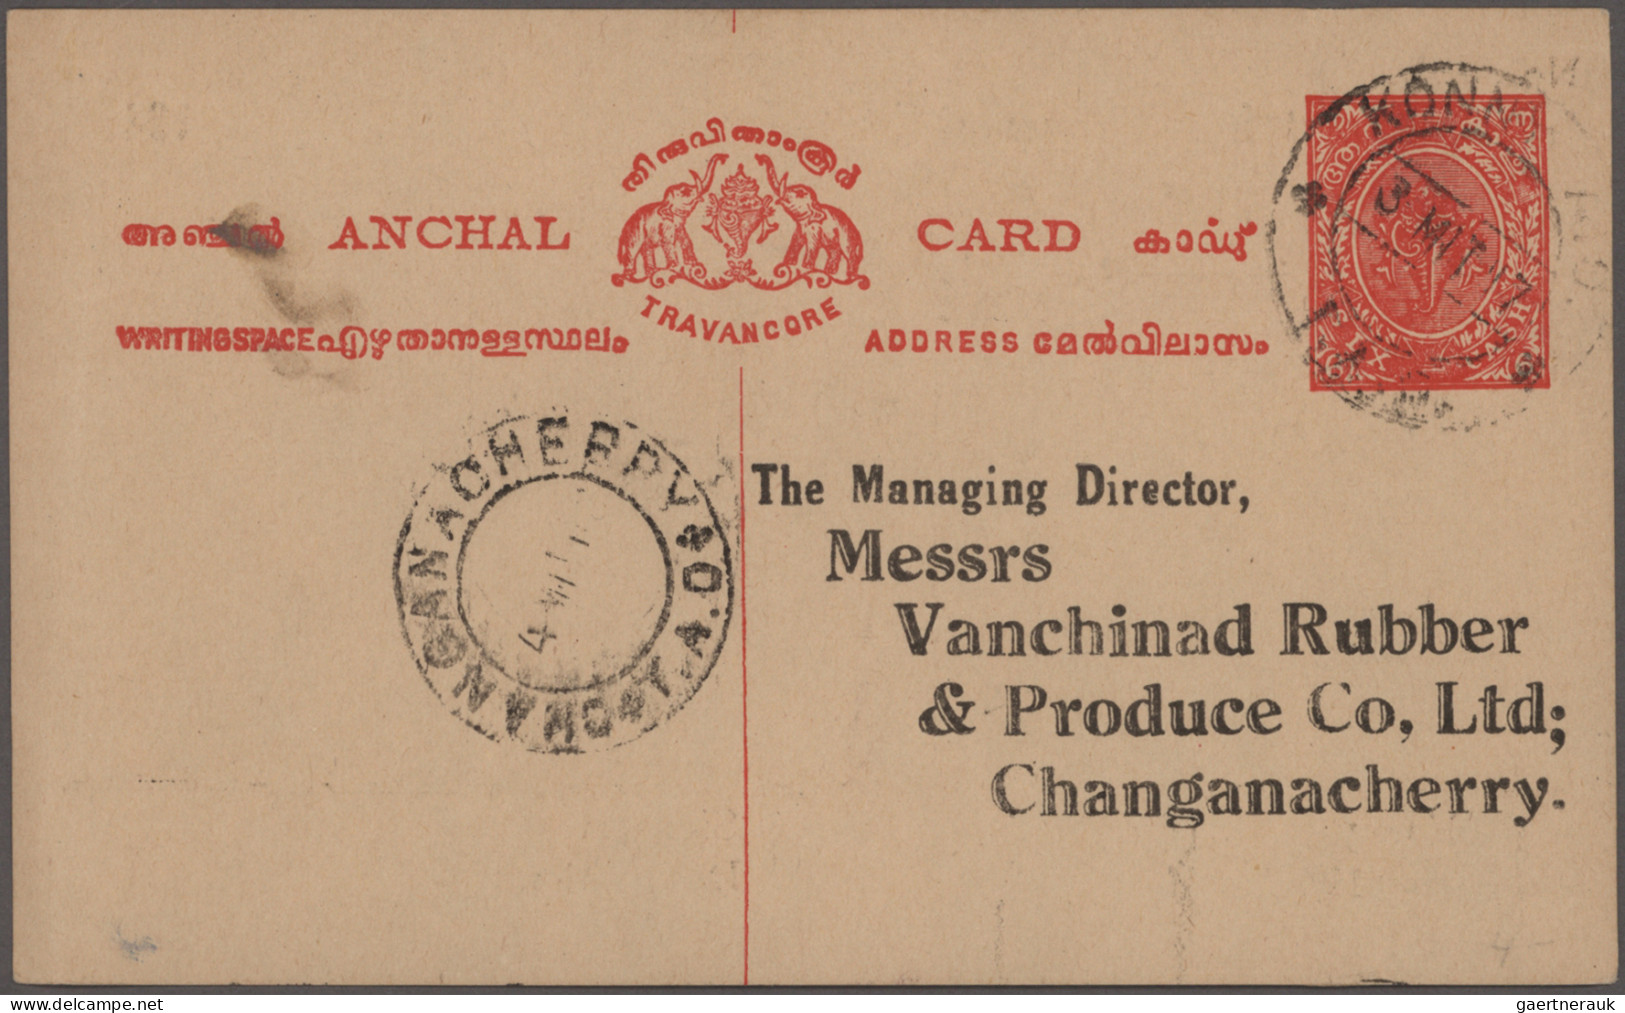 India - postal stationery: 1850's-1960's (c.): About 150 postal stationery items